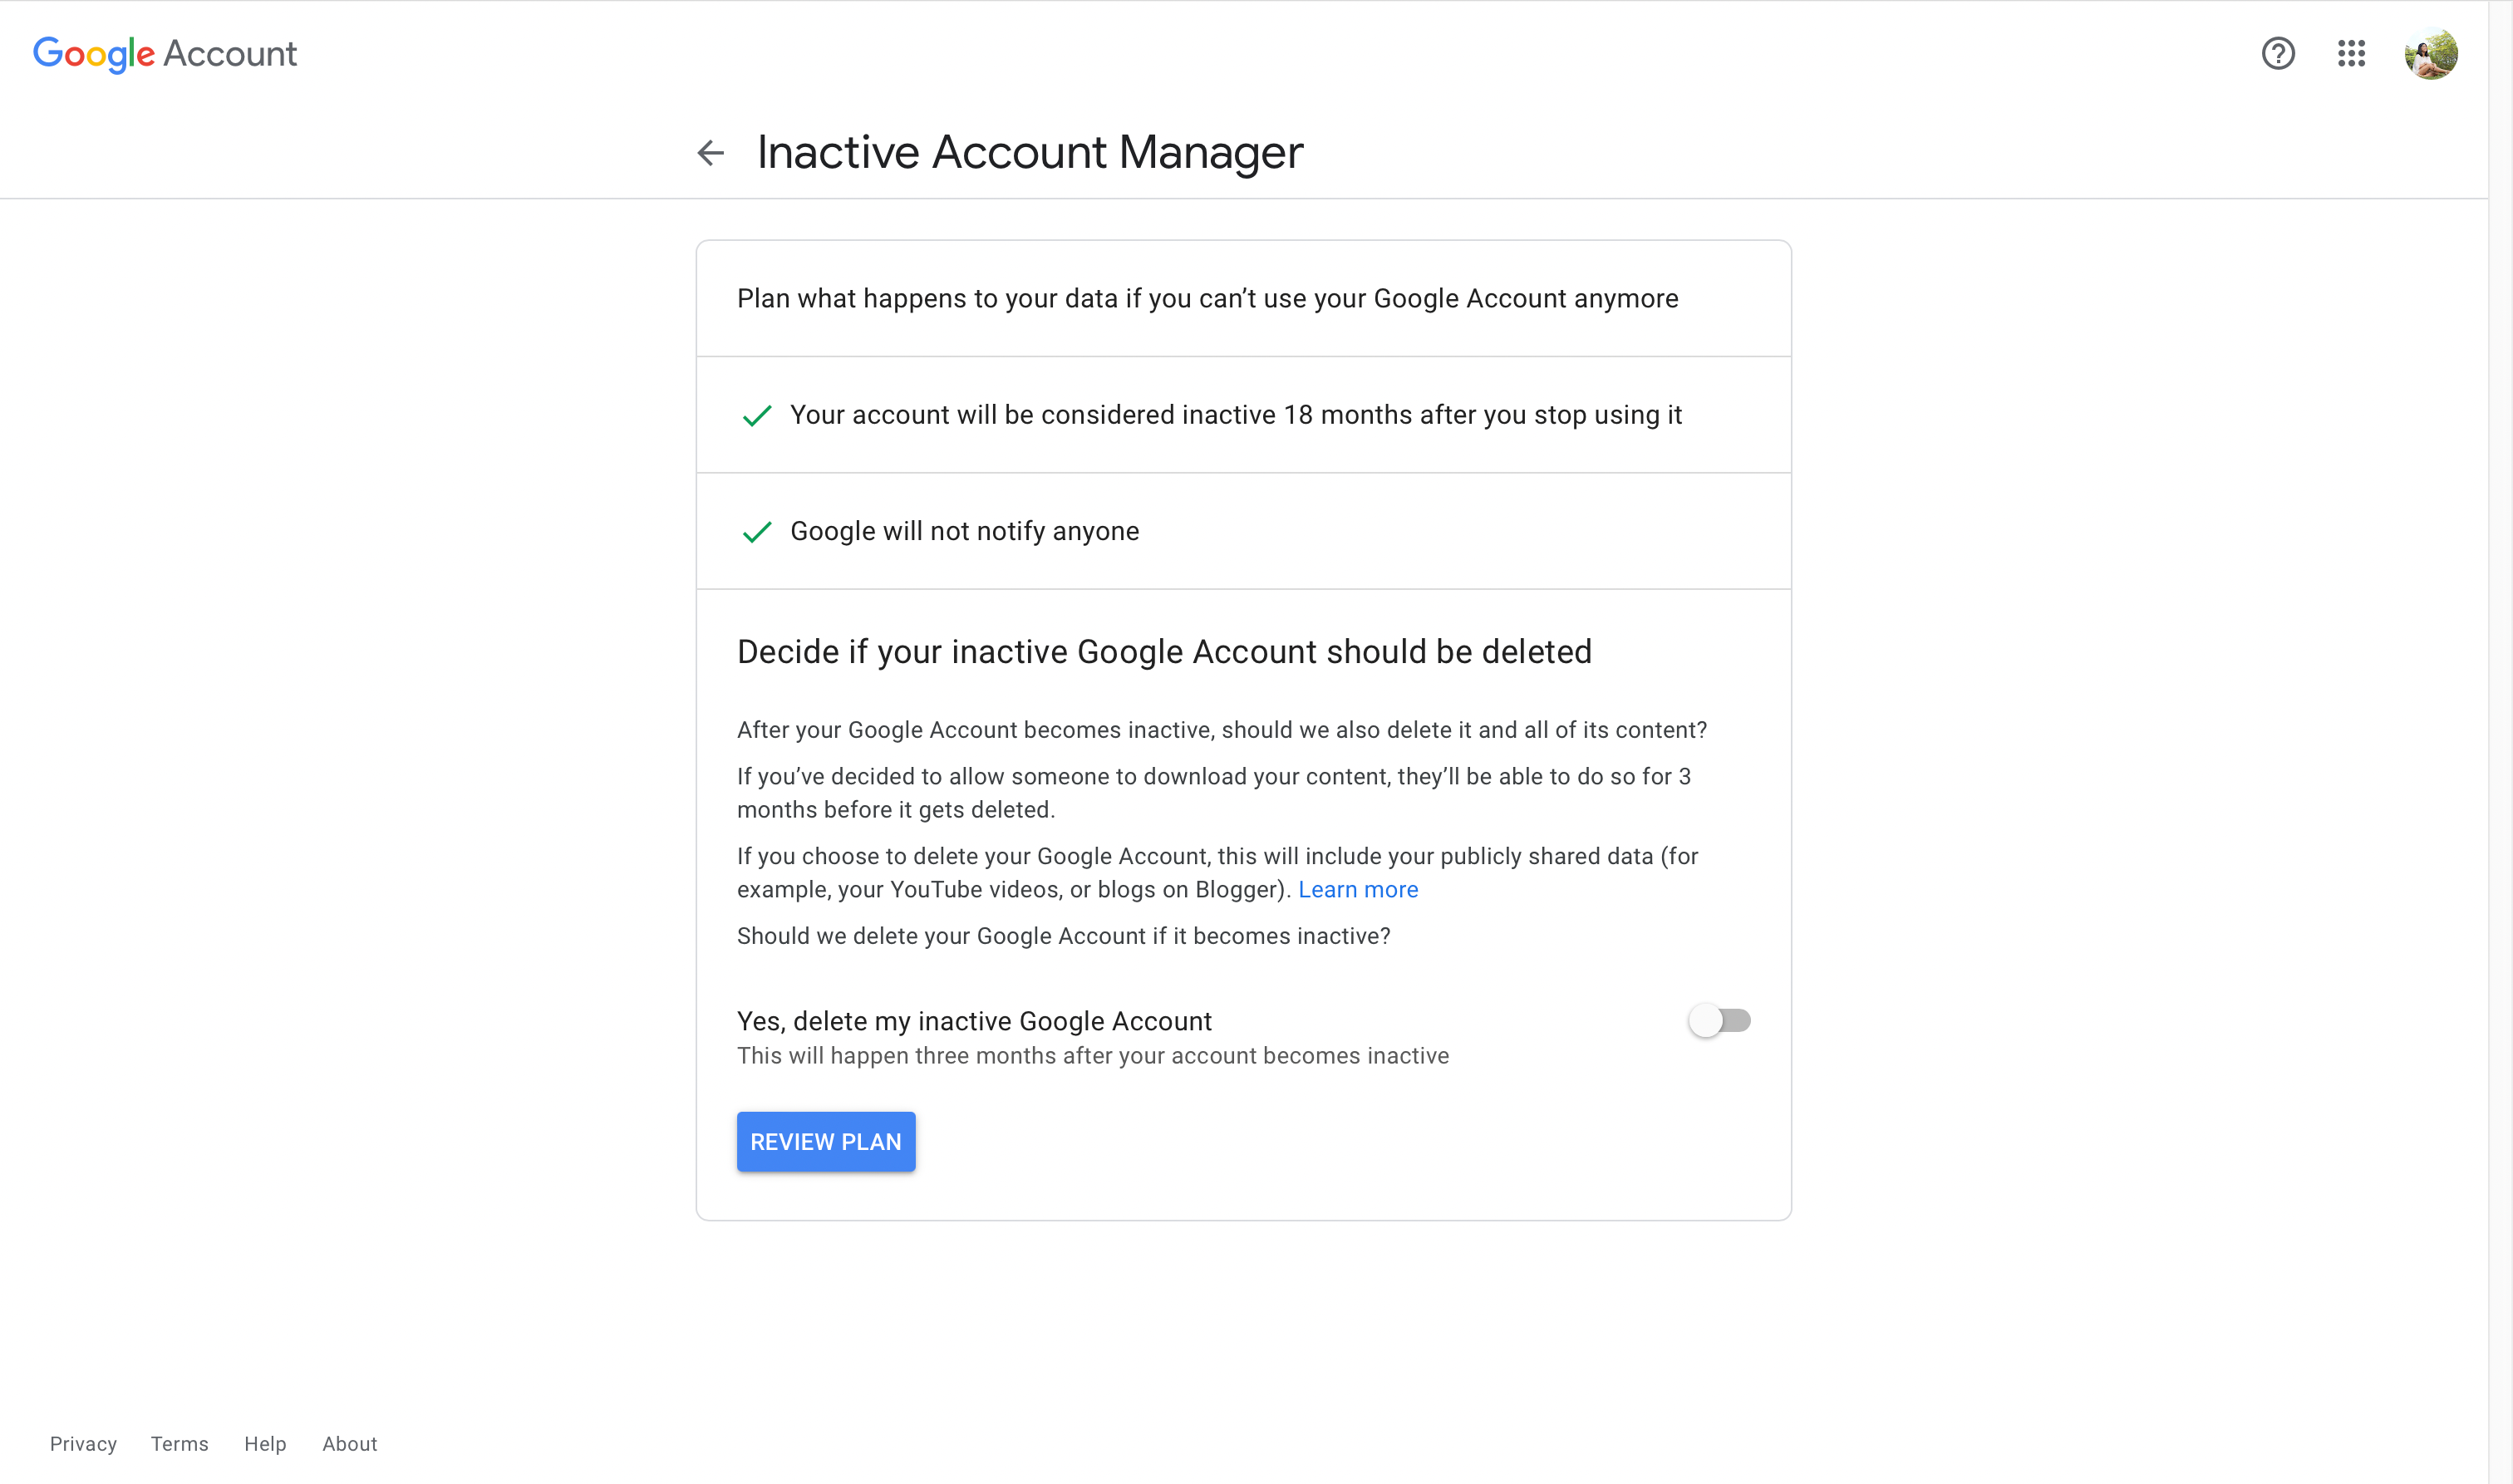 Decide if Google Inactive Account should be deleted